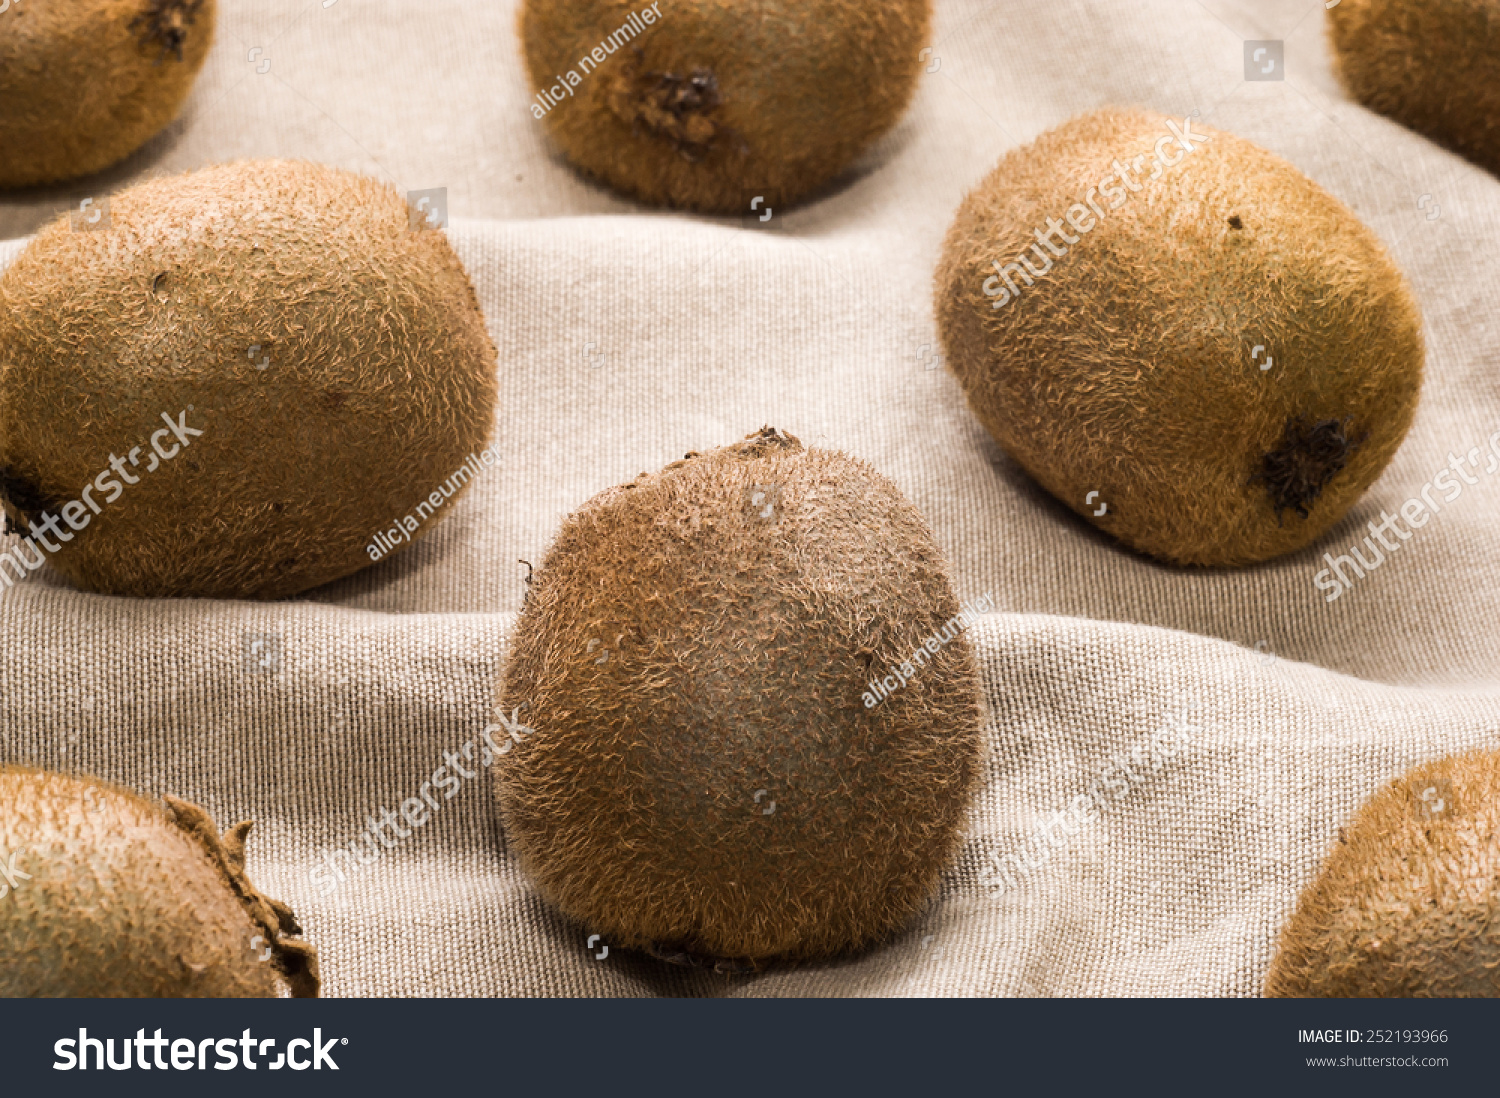 Several pieces of kiwi on canvas useful as background #252193966